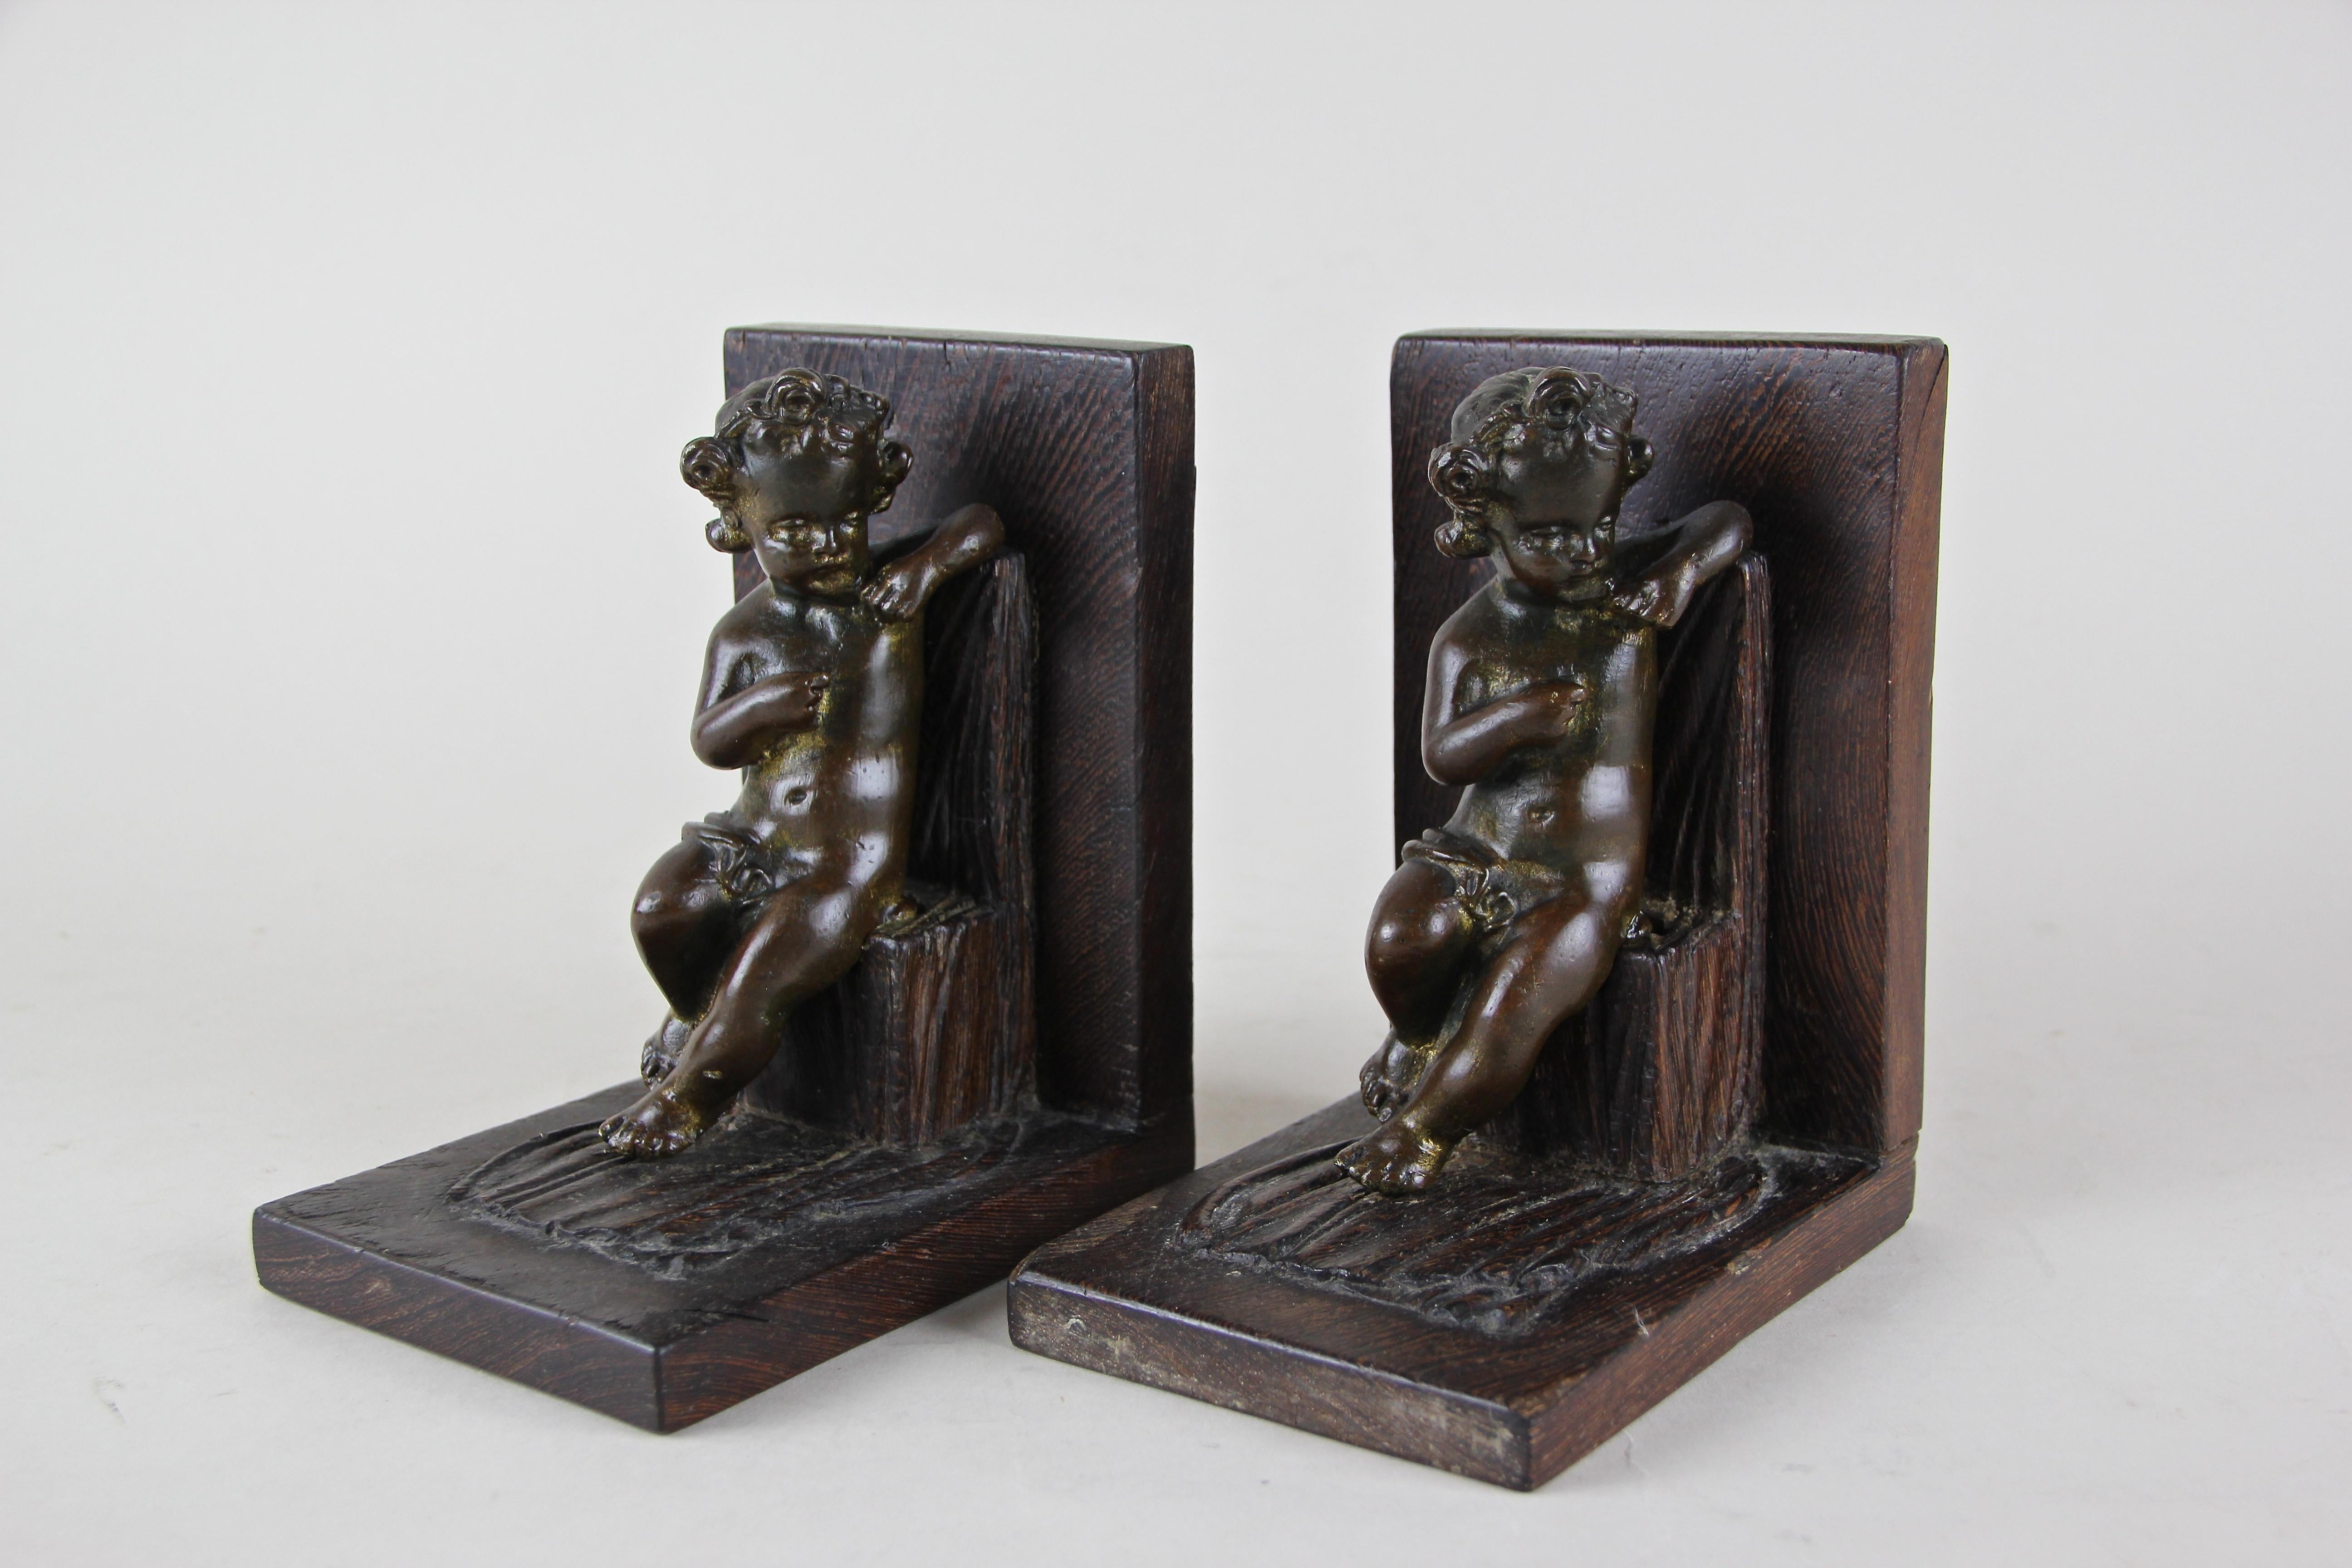 Lovely set of wooden Art Nouveau bookends adorned by putti sitting on a stool. The artfully designed Putti were made of solid bronze, all other parts were hand carved out of wood. An unusual set of over 120 year old bookends which will add an